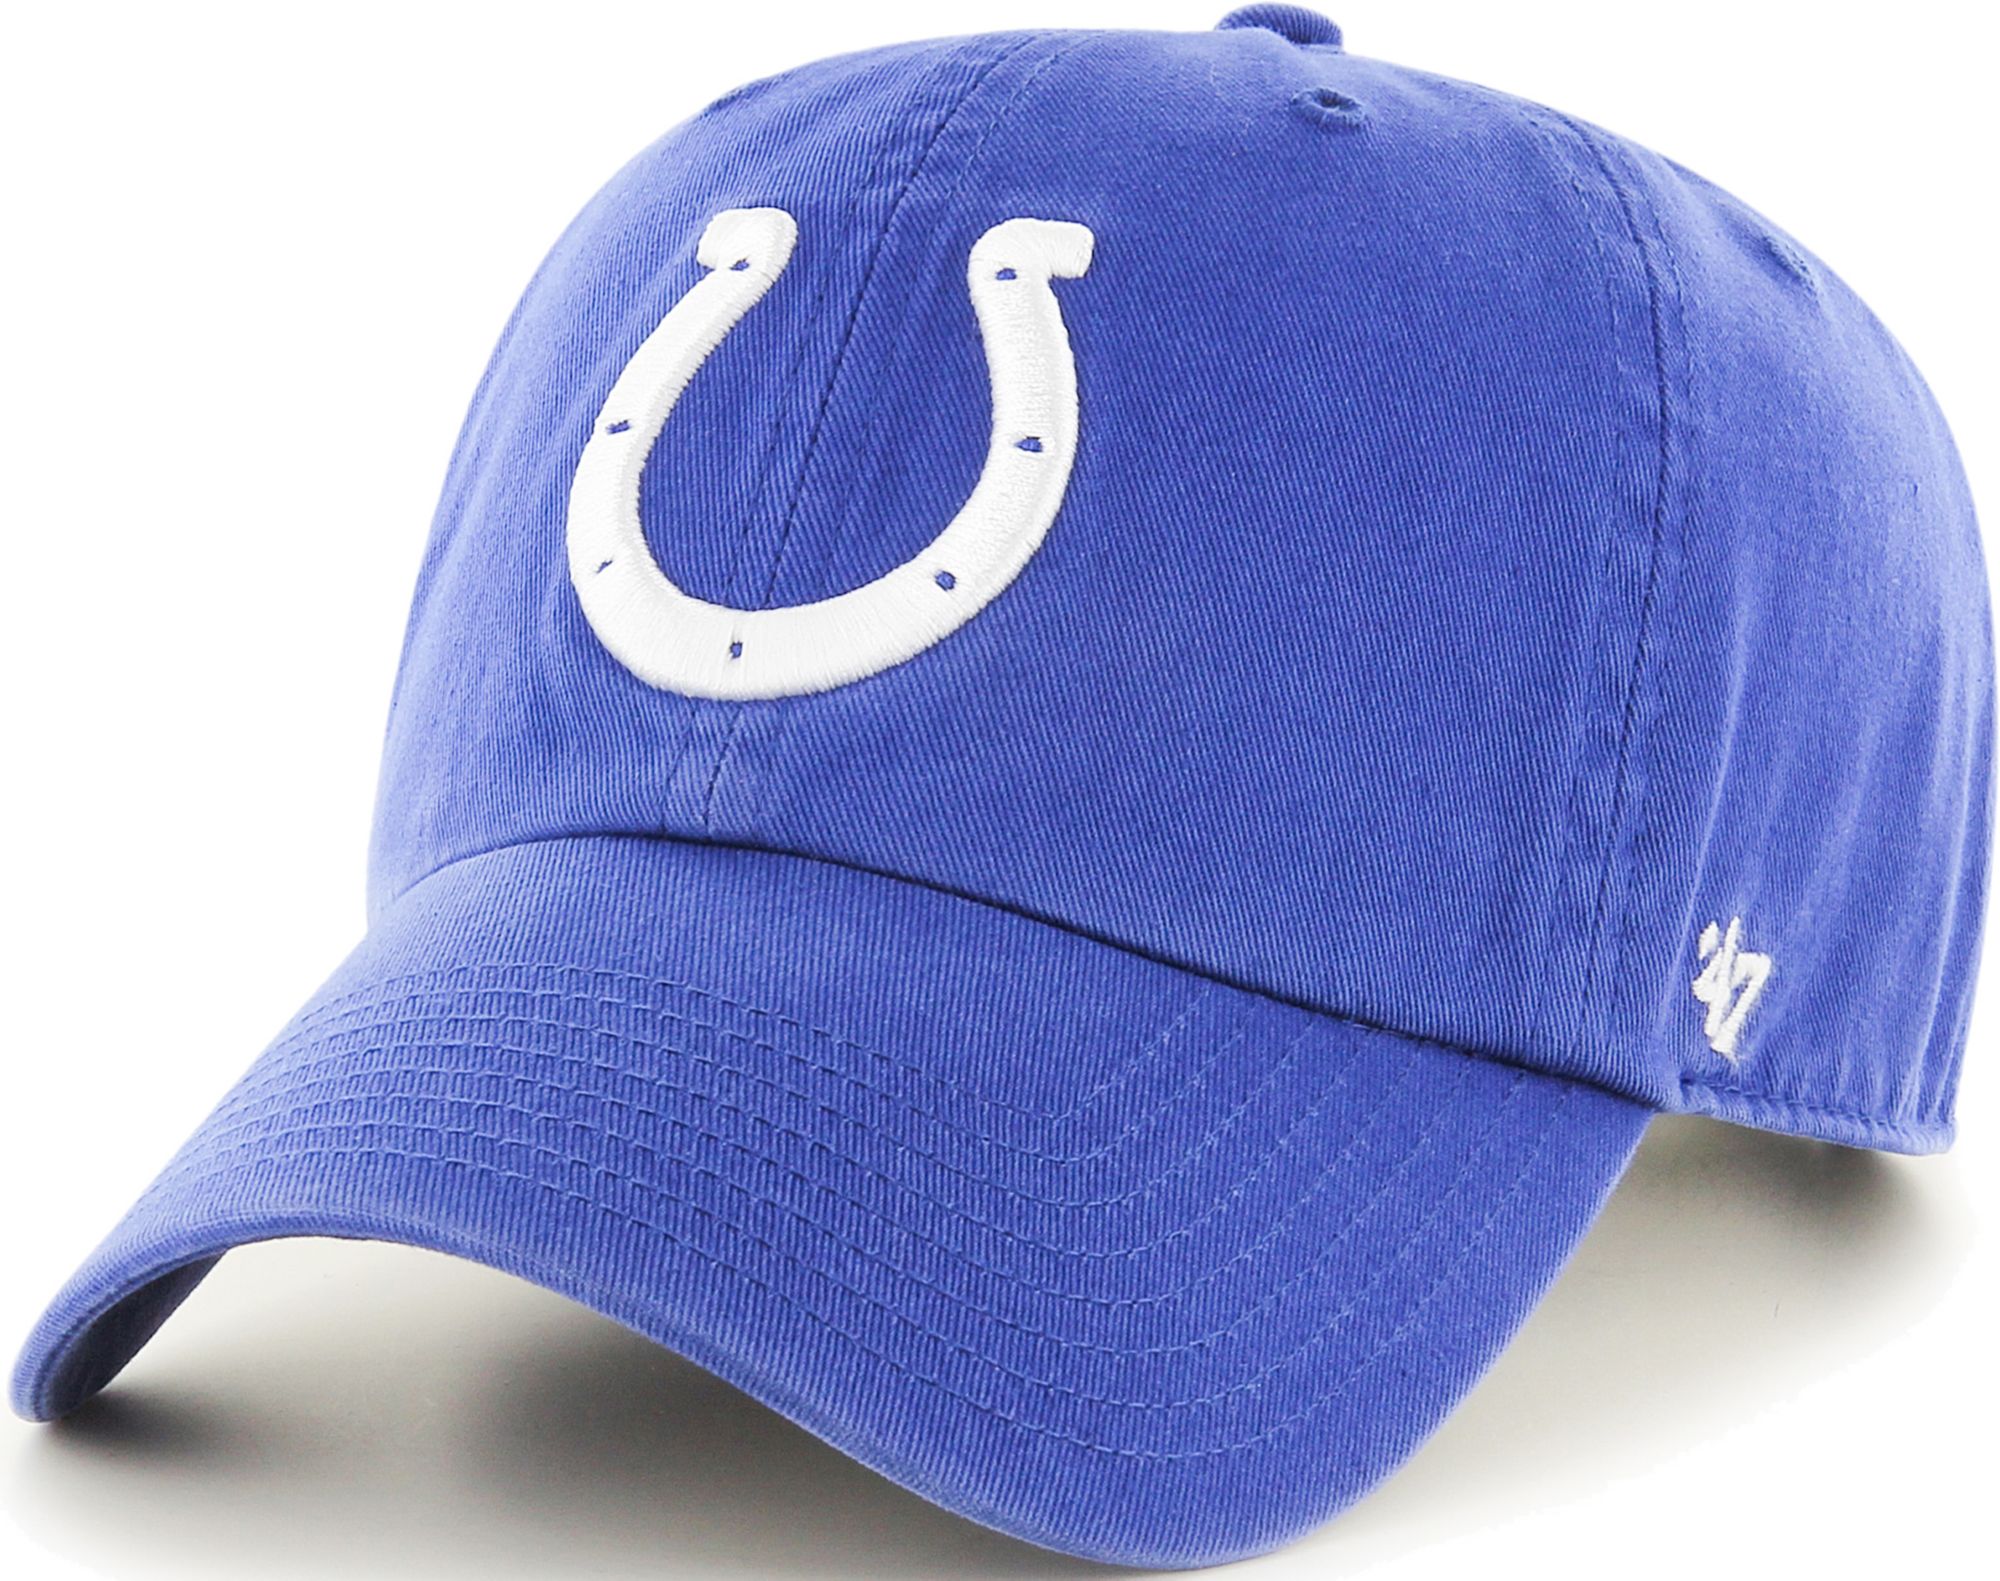 indianapolis colts hat